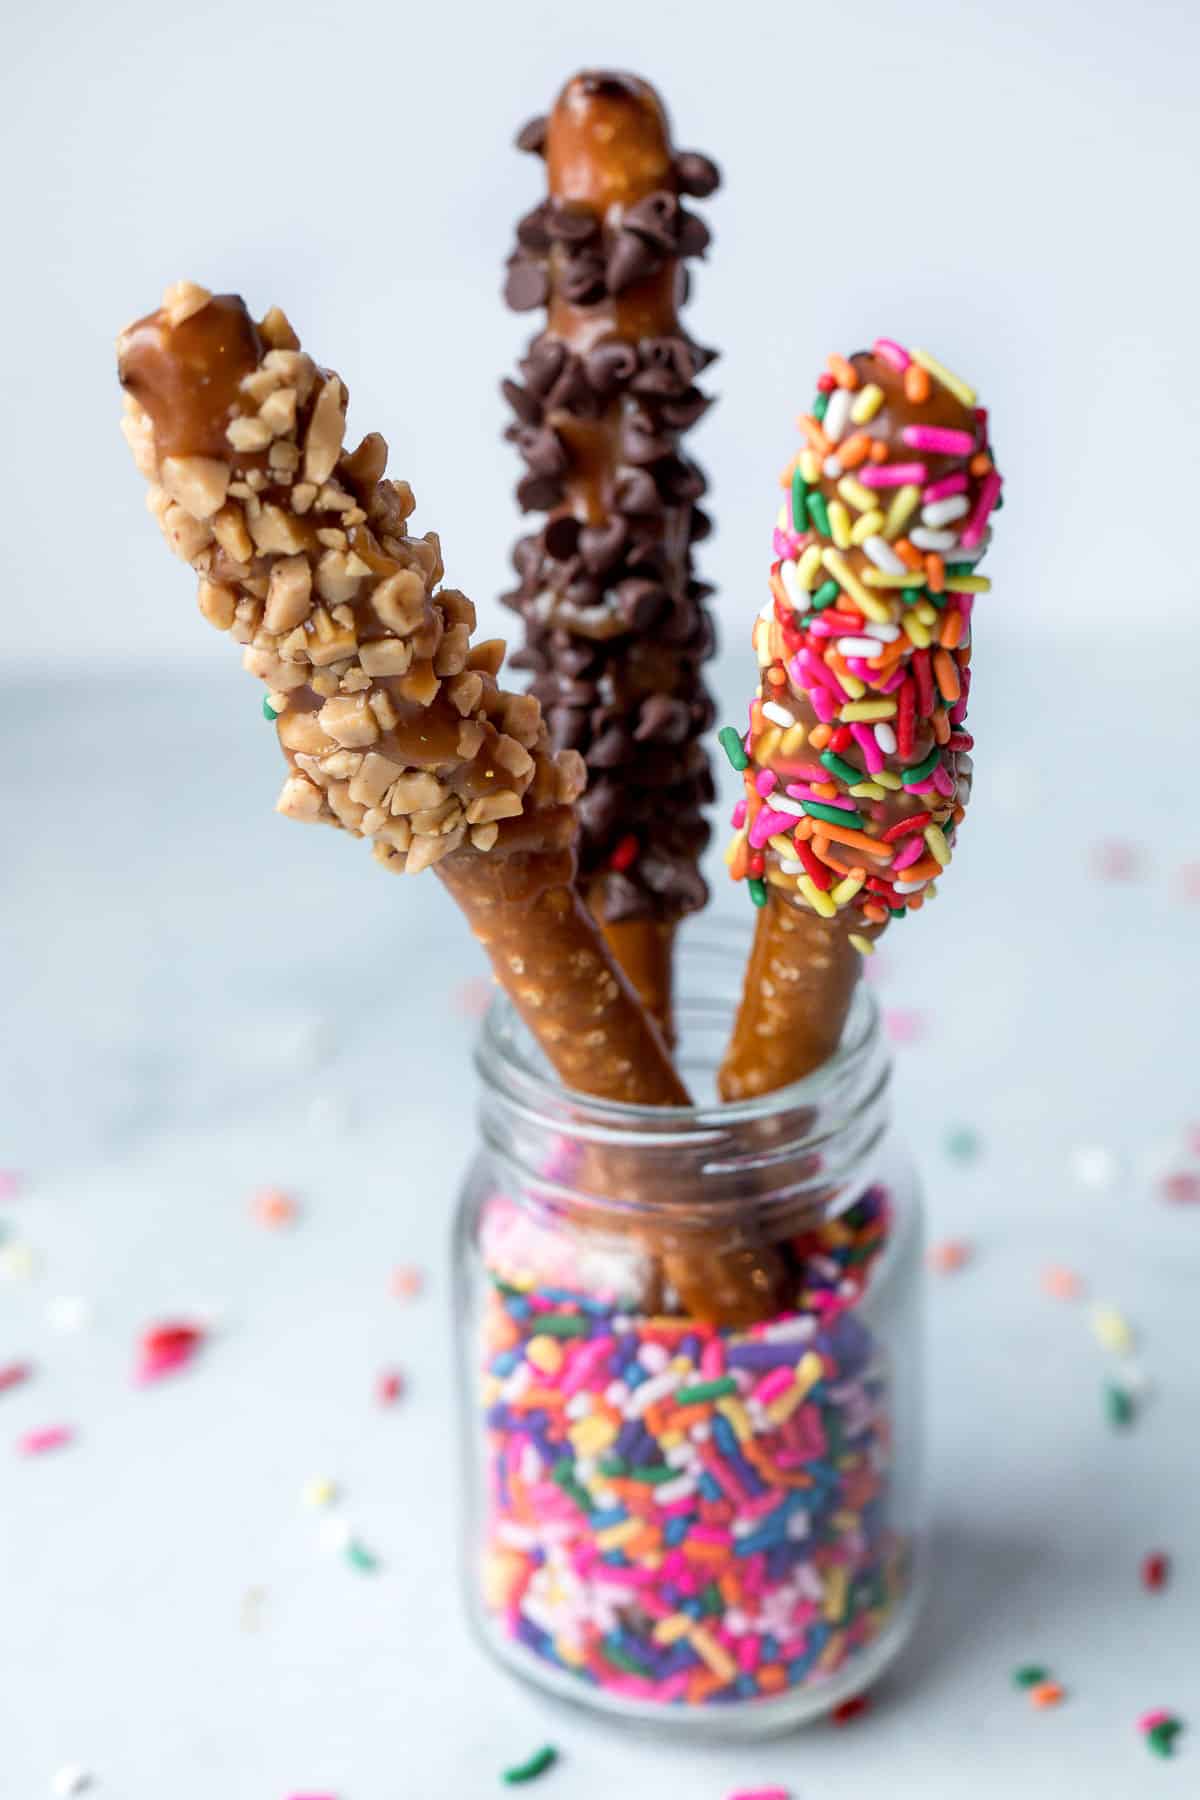 3 pretzel rods dipped in caramel and various toppings standing up in a glass jar with sprinkles